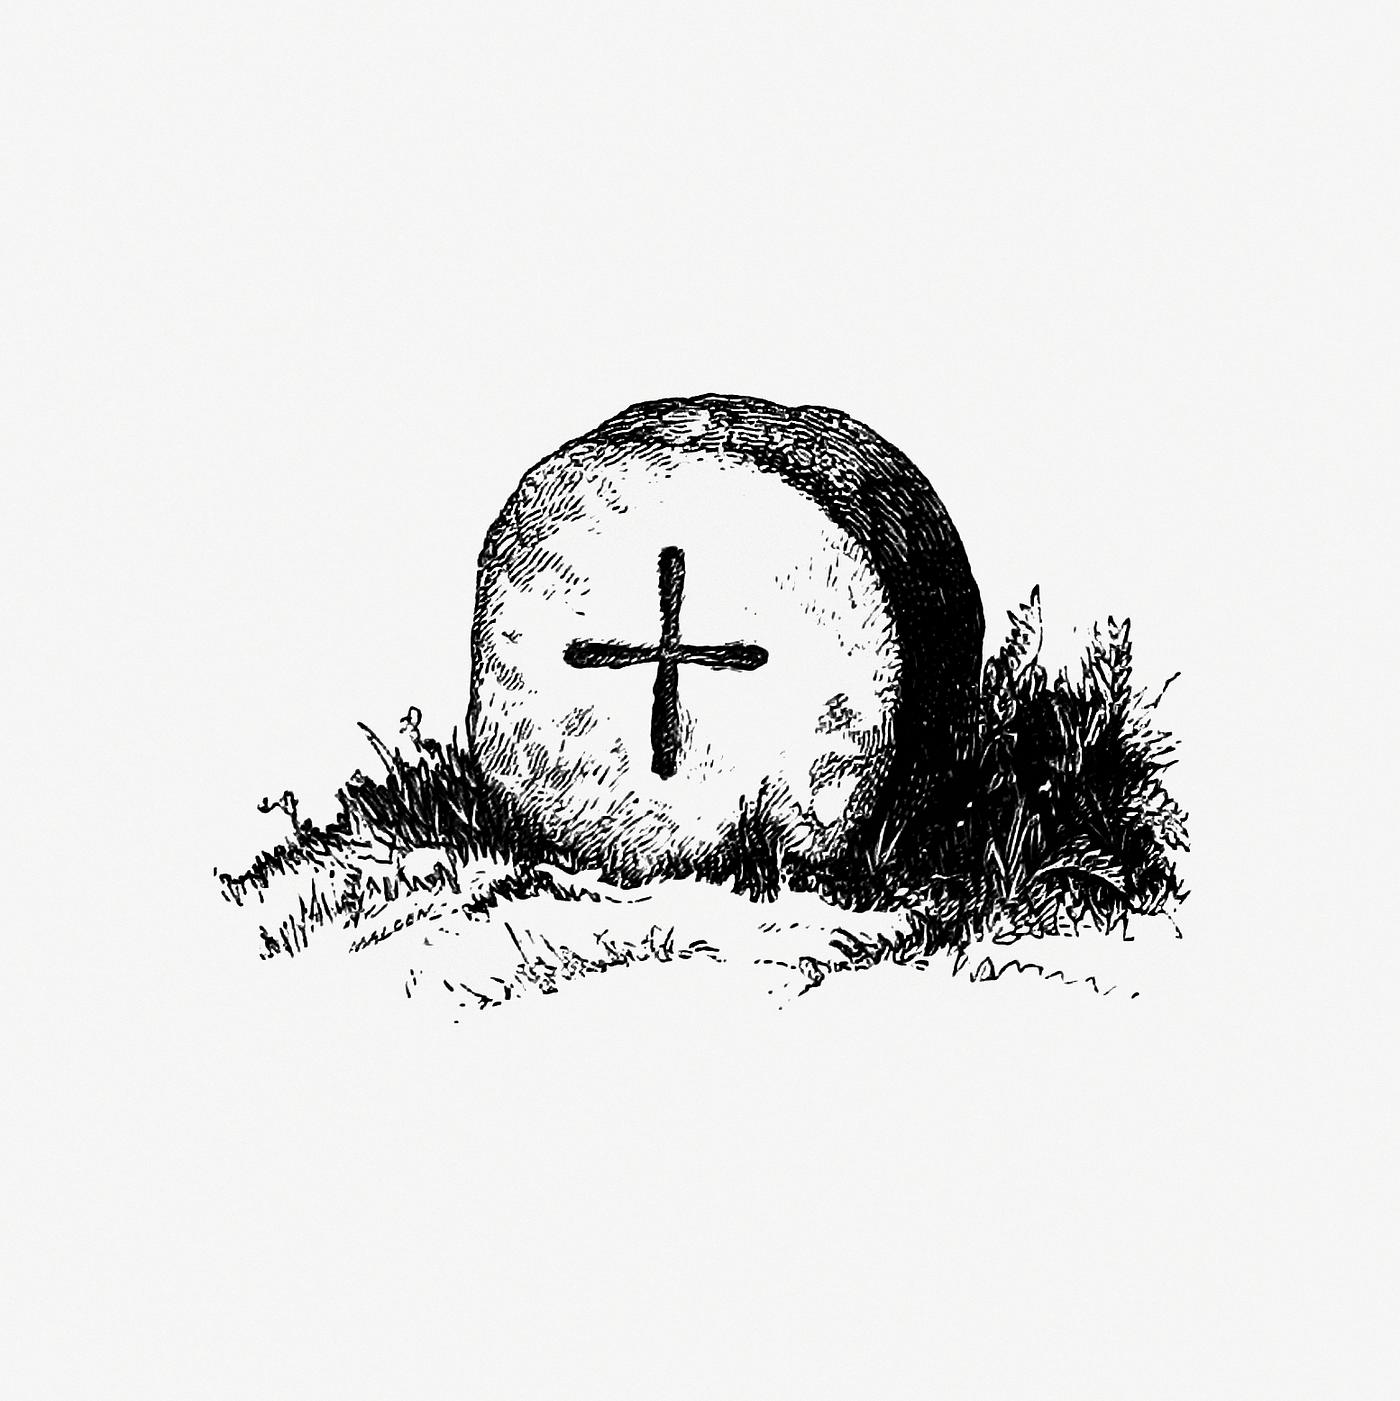 Old tombstone drawing | Royalty free stock illustration - 571469